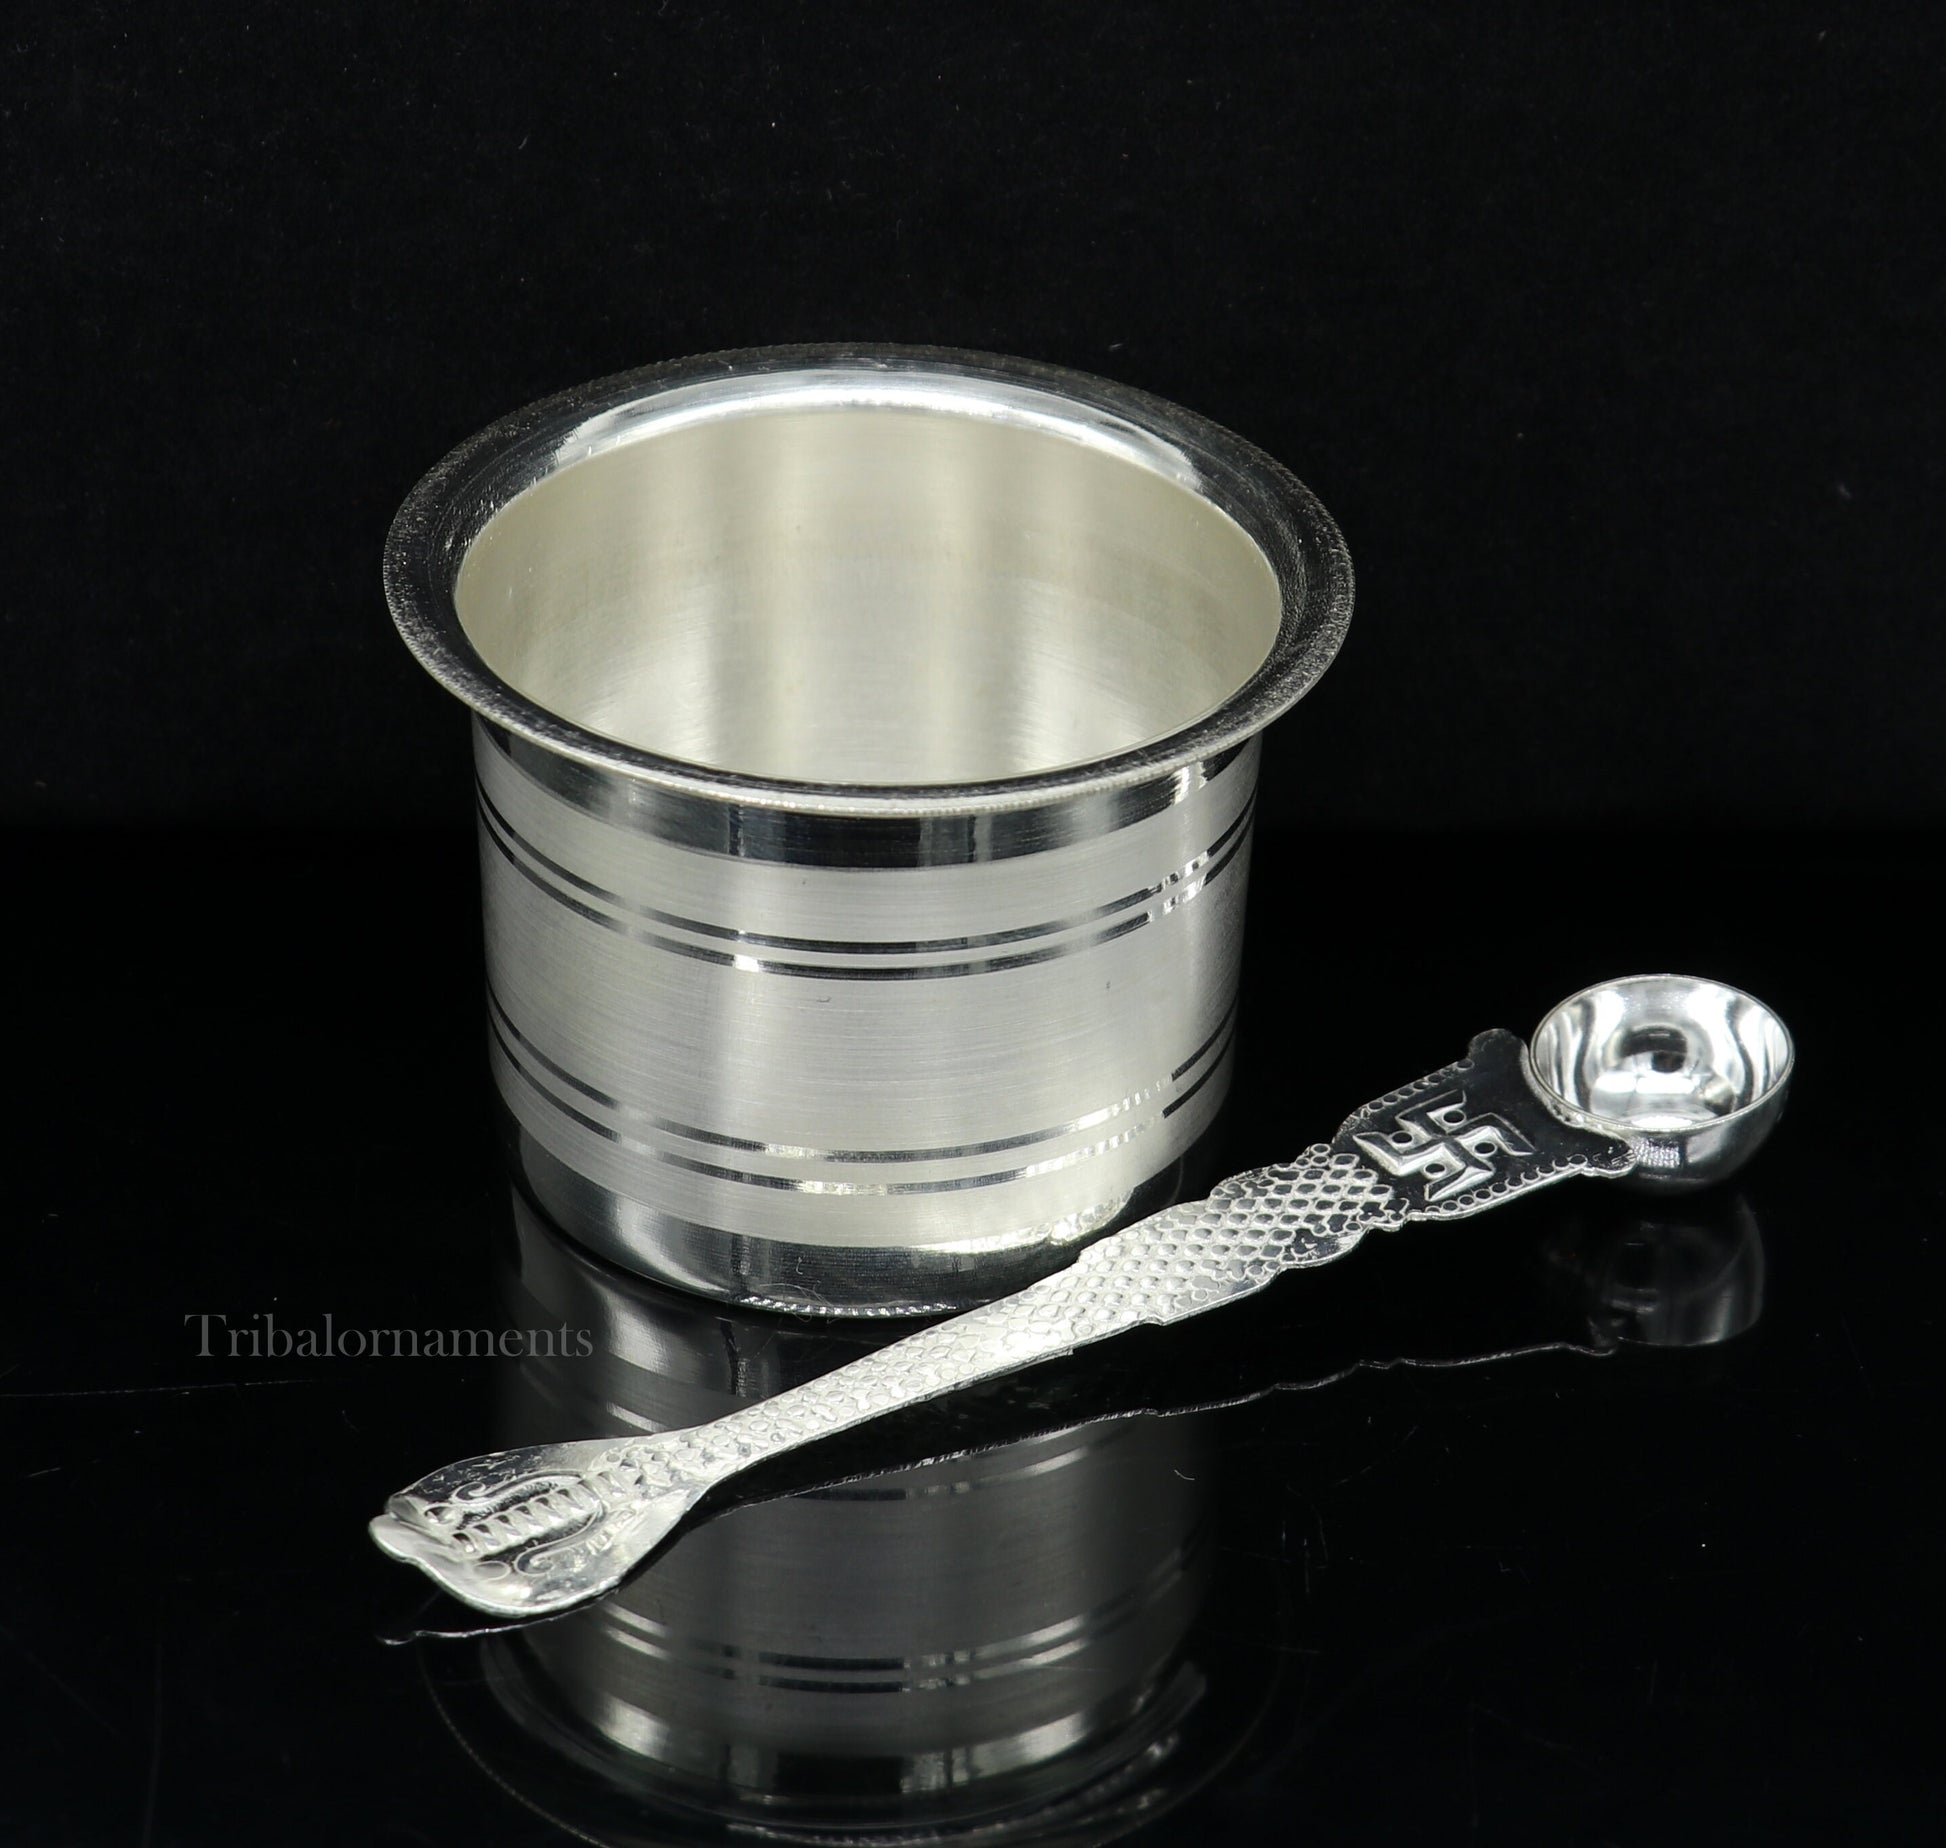 Silver Elegant Ghee pot patra puja or worshipping silver ghee bowl or pot, Butter pot for kitchen, silver puja utensils from India su542 - TRIBAL ORNAMENTS